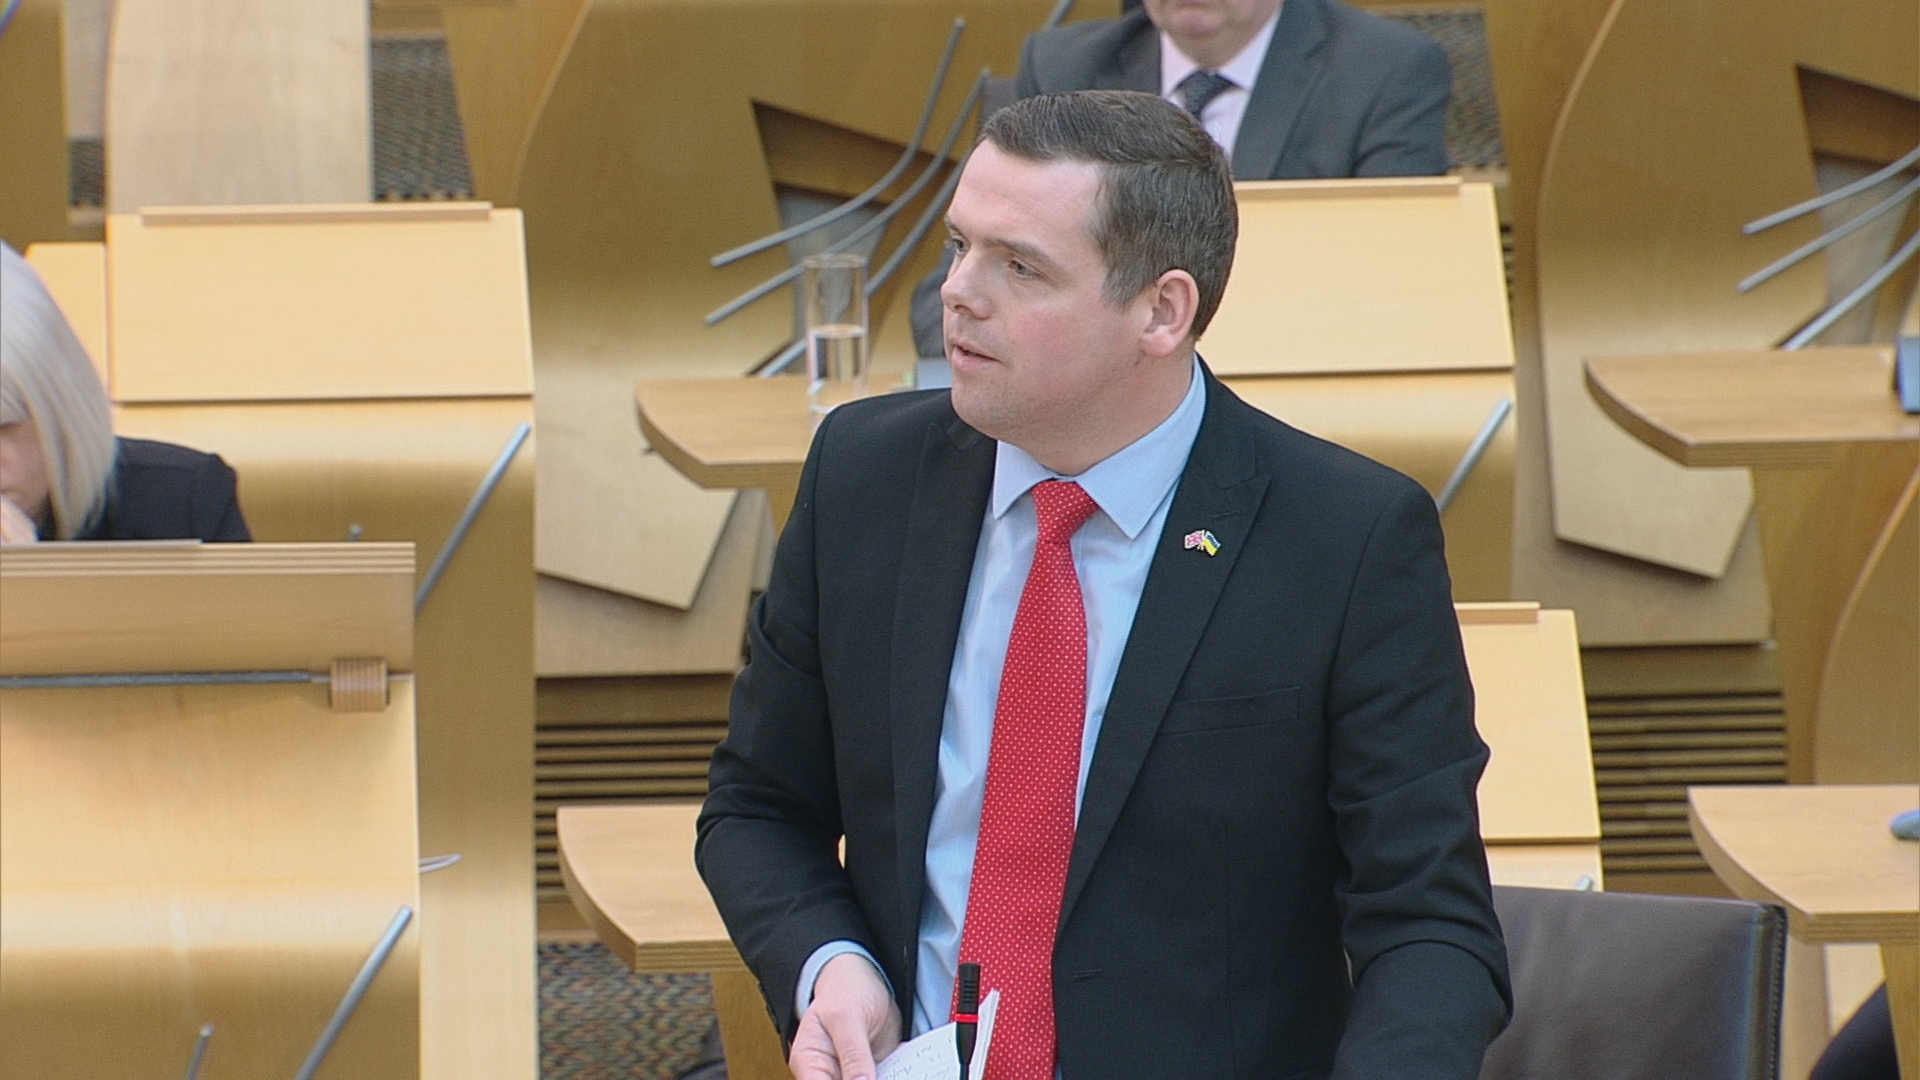 Douglas Ross quizzed Nicola Sturgeon at First Minister's Questions.